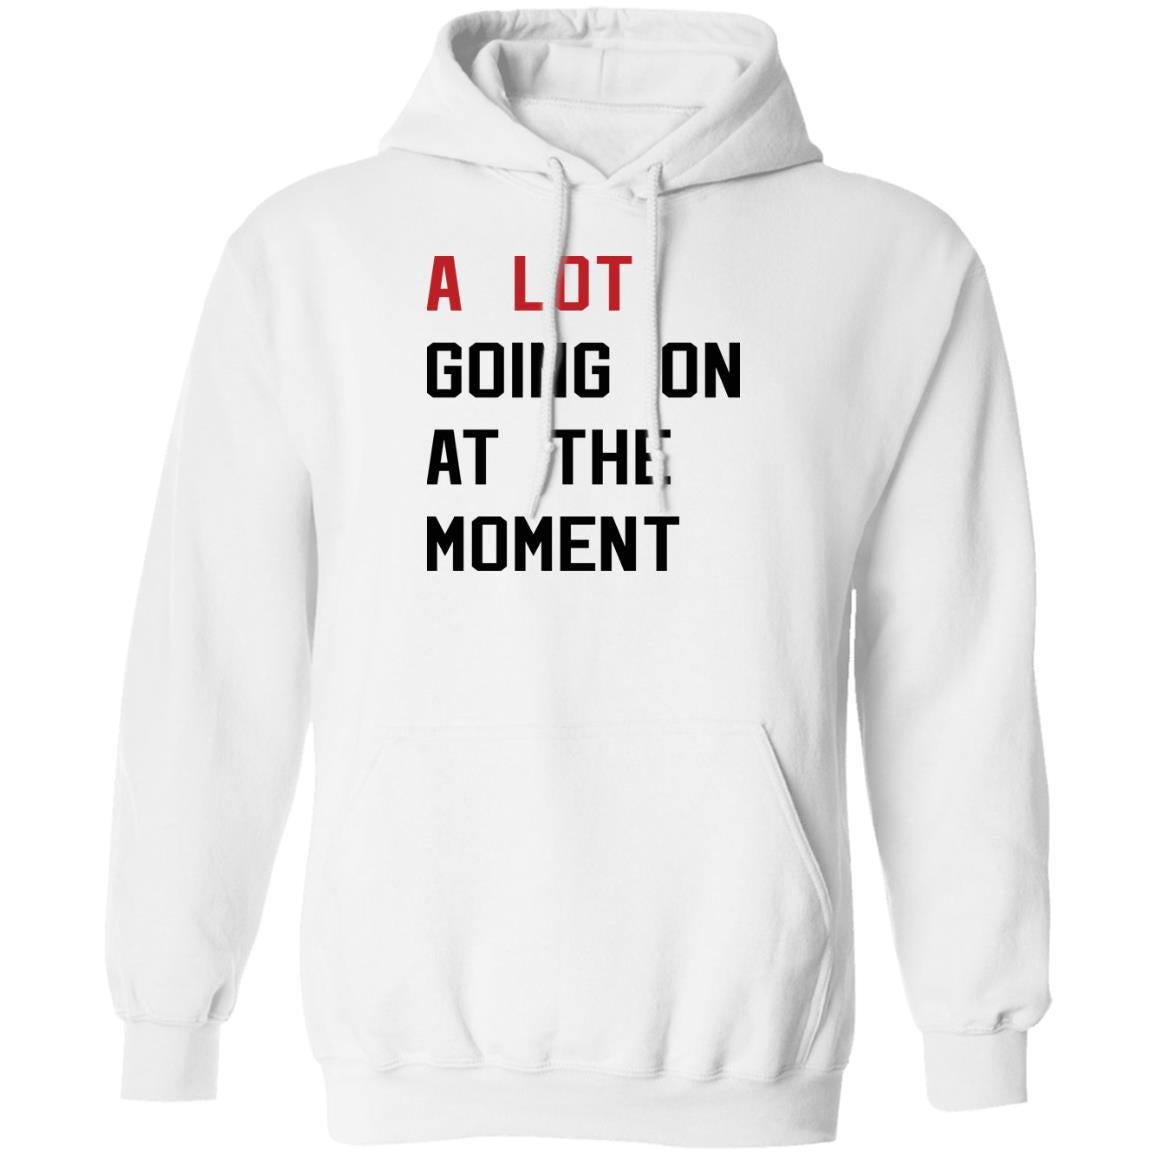 A Lot Going On At The Moment hoodie